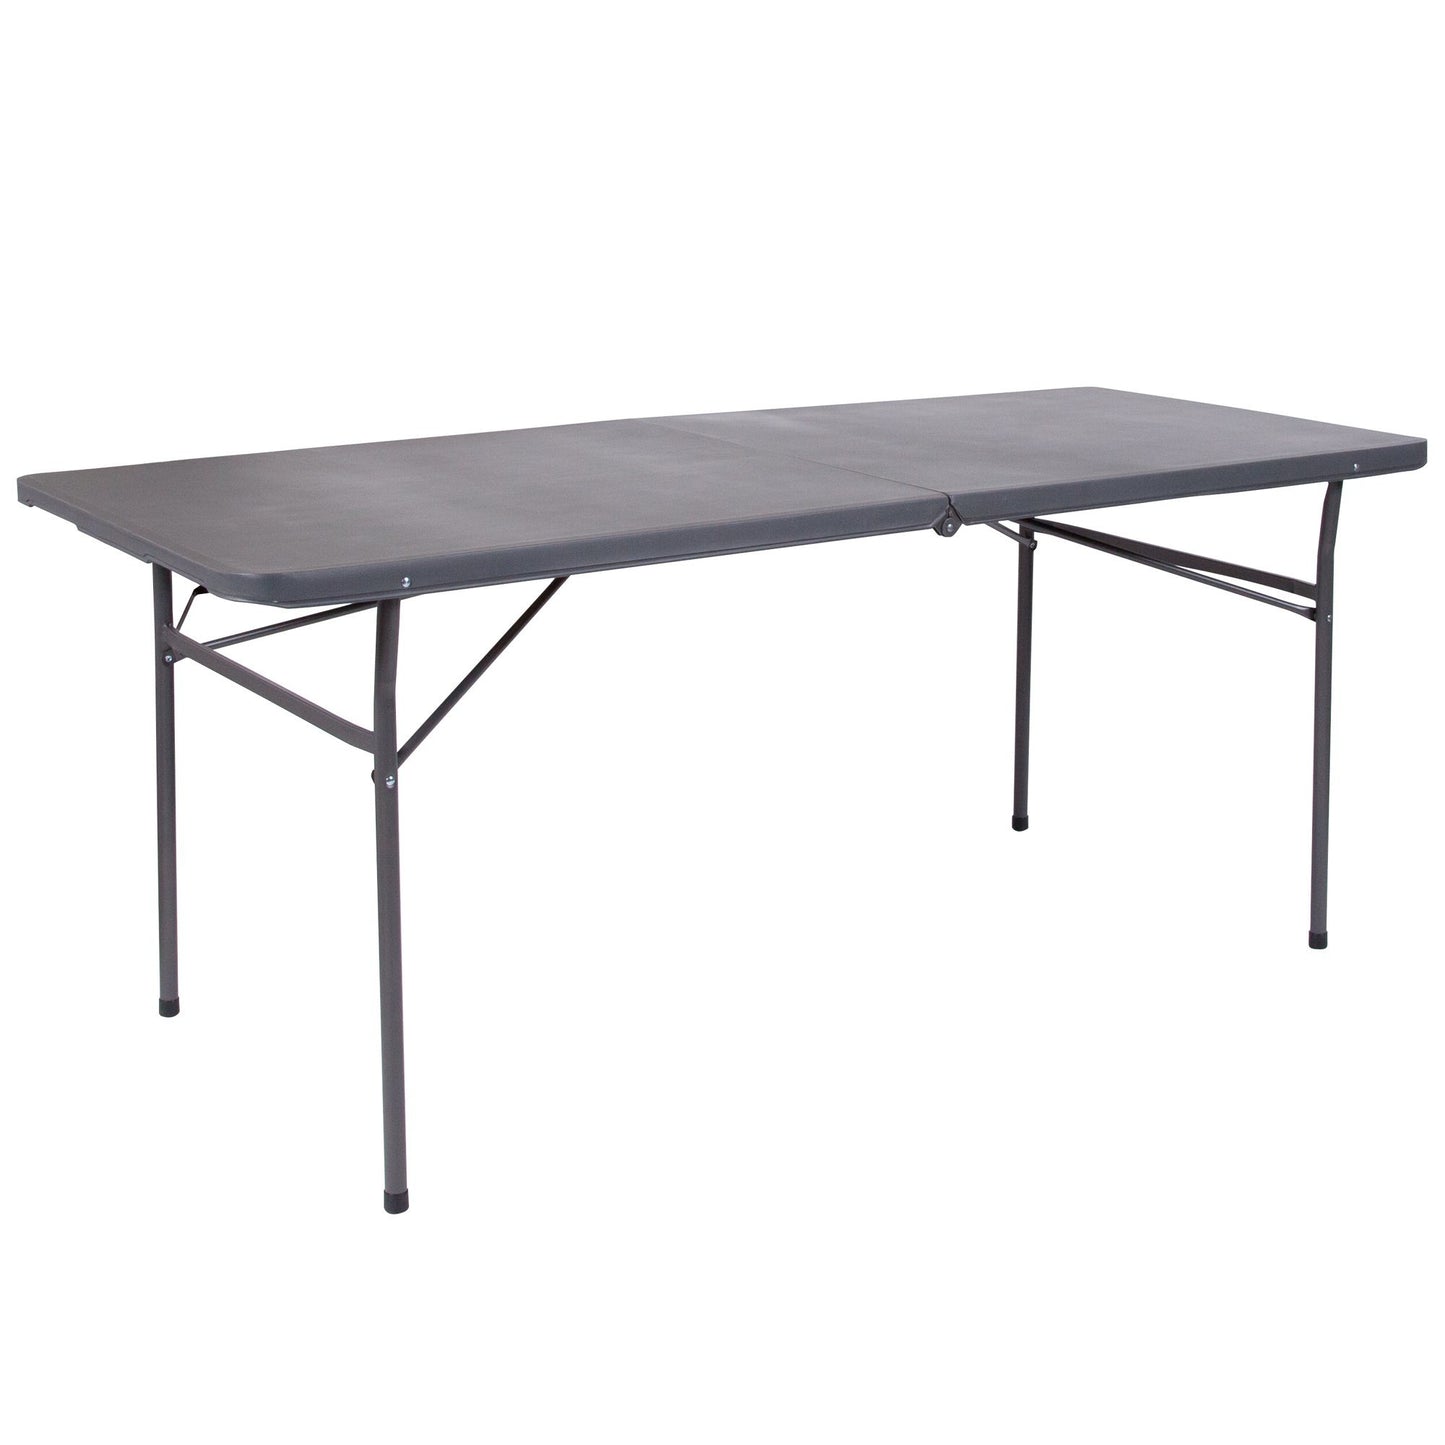 6-Foot Bi-Fold Granite White Plastic Banquet and Event Folding Table with Carrying Handle